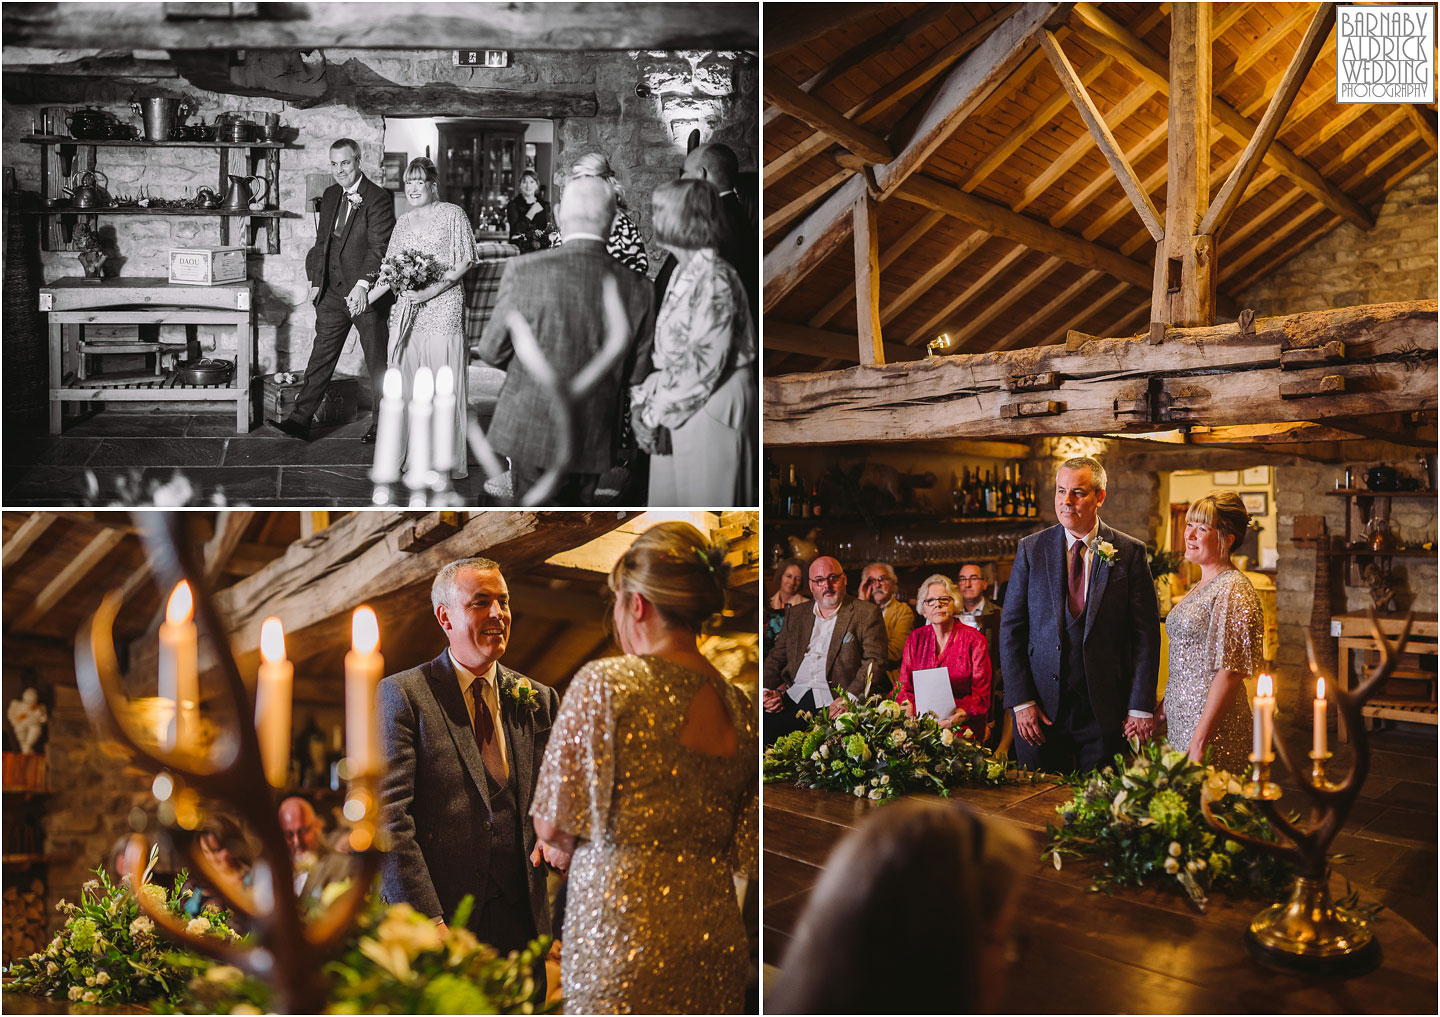 The wedding ceremony at The cross house lodge by the Star Inn in Harome, Wedding Photography by Yorkshire Wedding Photographer Barnaby Aldrick, Star Inn wedding, Yorkshire wedding, Helmsley Wedding, Michelin Star Wedding venues